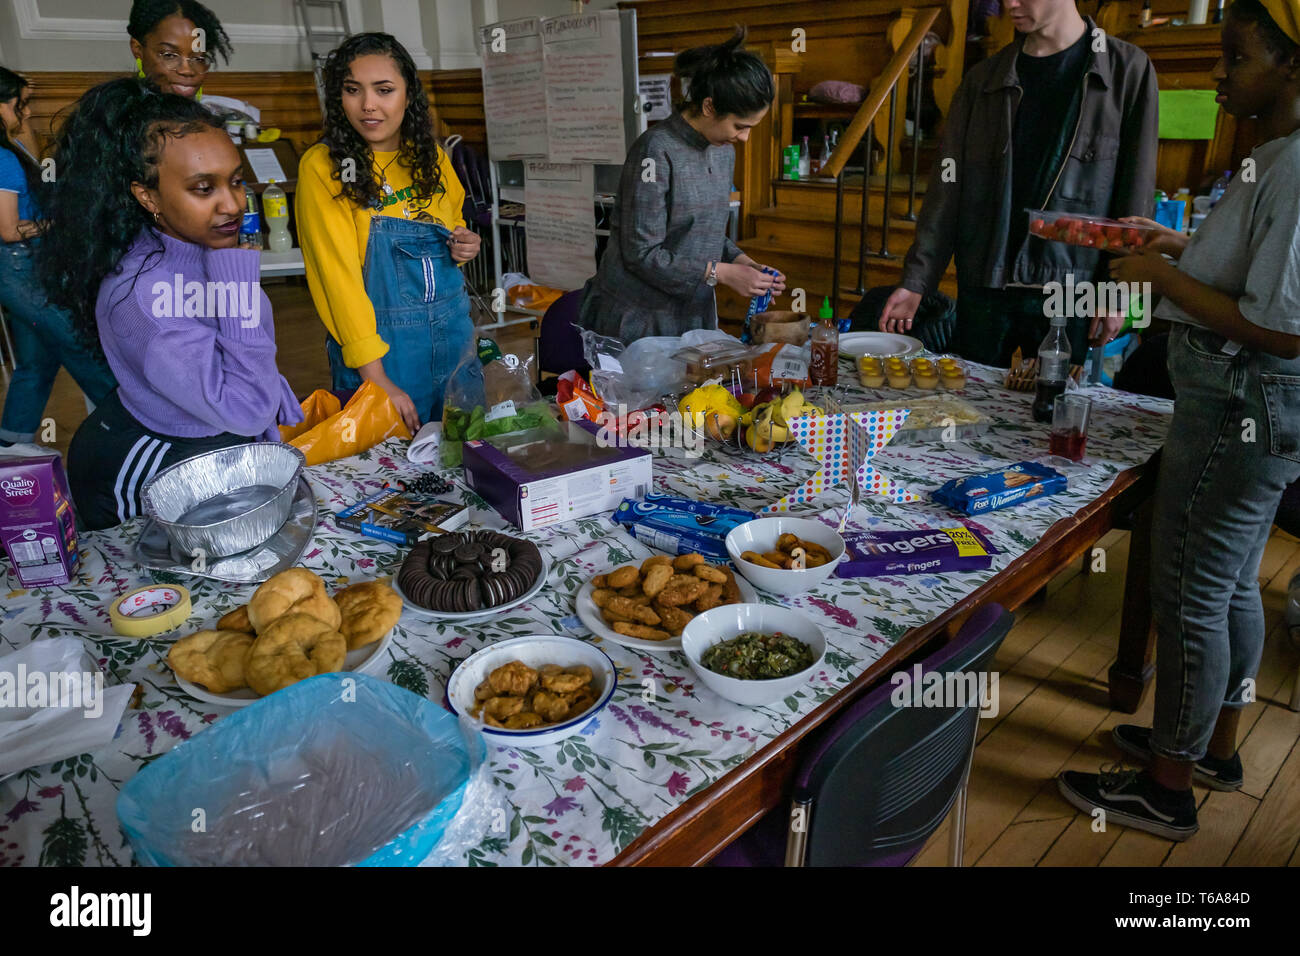 London, UK. 30th April 2018. Goldsmiths Anti-Racist Action celebrate 50 days of occupation of the management building, the former Deptford Town Hall and prepare food for a party. The occupation began when the university failed to respond adequately to racist abuse of a candidate in the student elections. Students claim the university fails to treat BAME students and workers fairly, and among other demands insist Goldsmiths produces a strategic plan to tackle racism. Credit: Peter Marshall/Alamy Live News Stock Photo